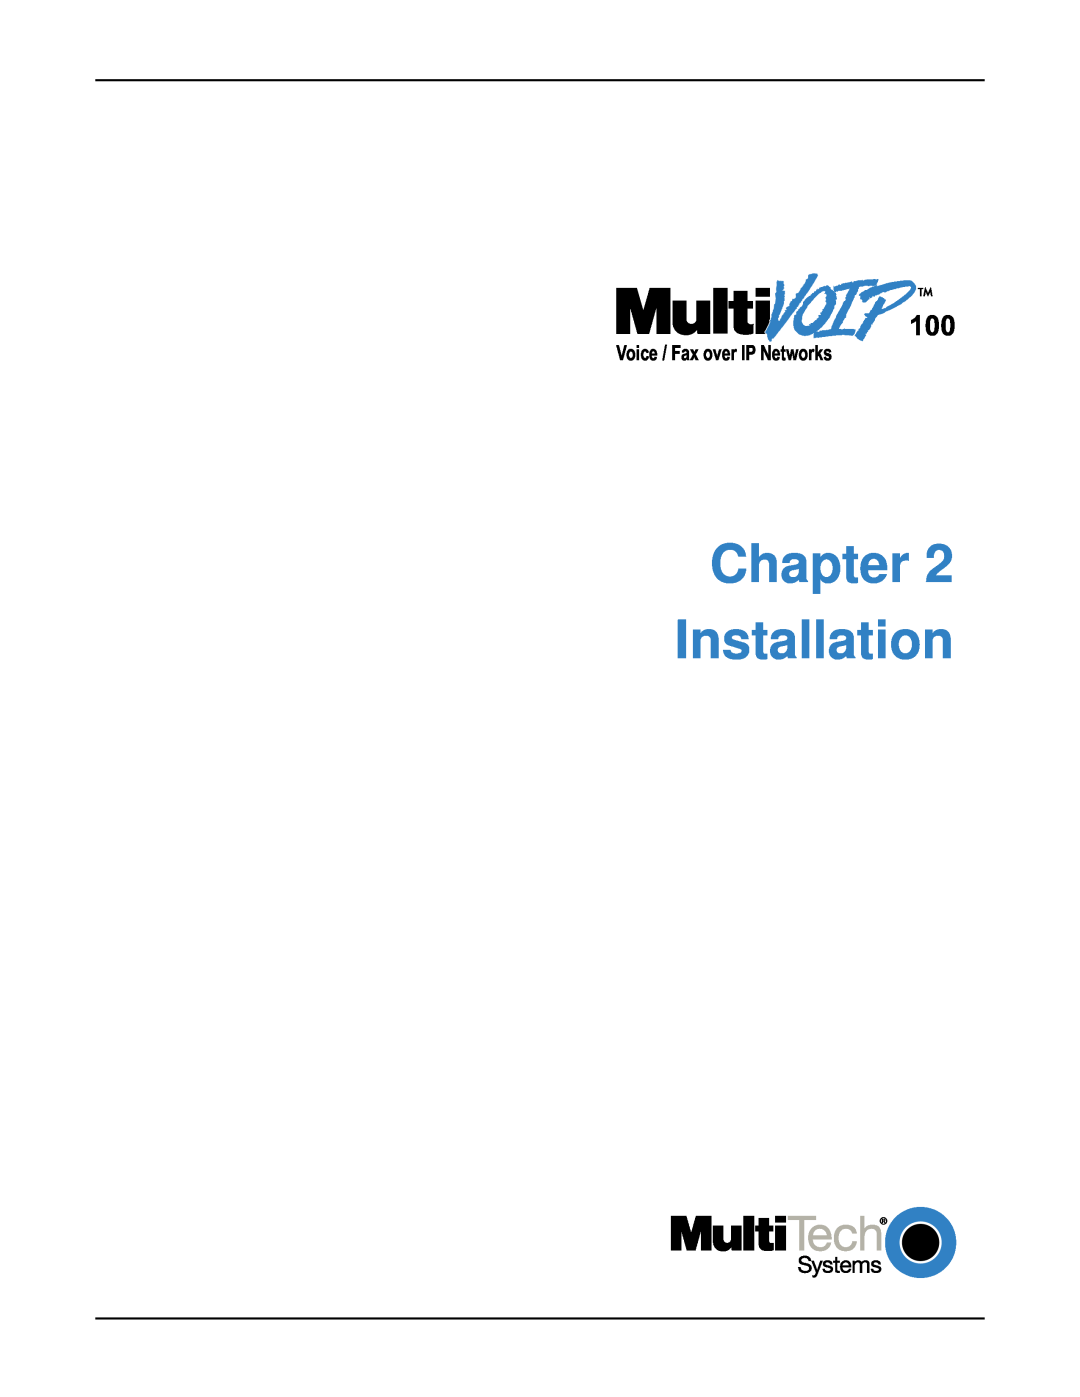 Multi-Tech Systems MVP120 manual Chapter Installation, Voice / Fax over IP Networks 